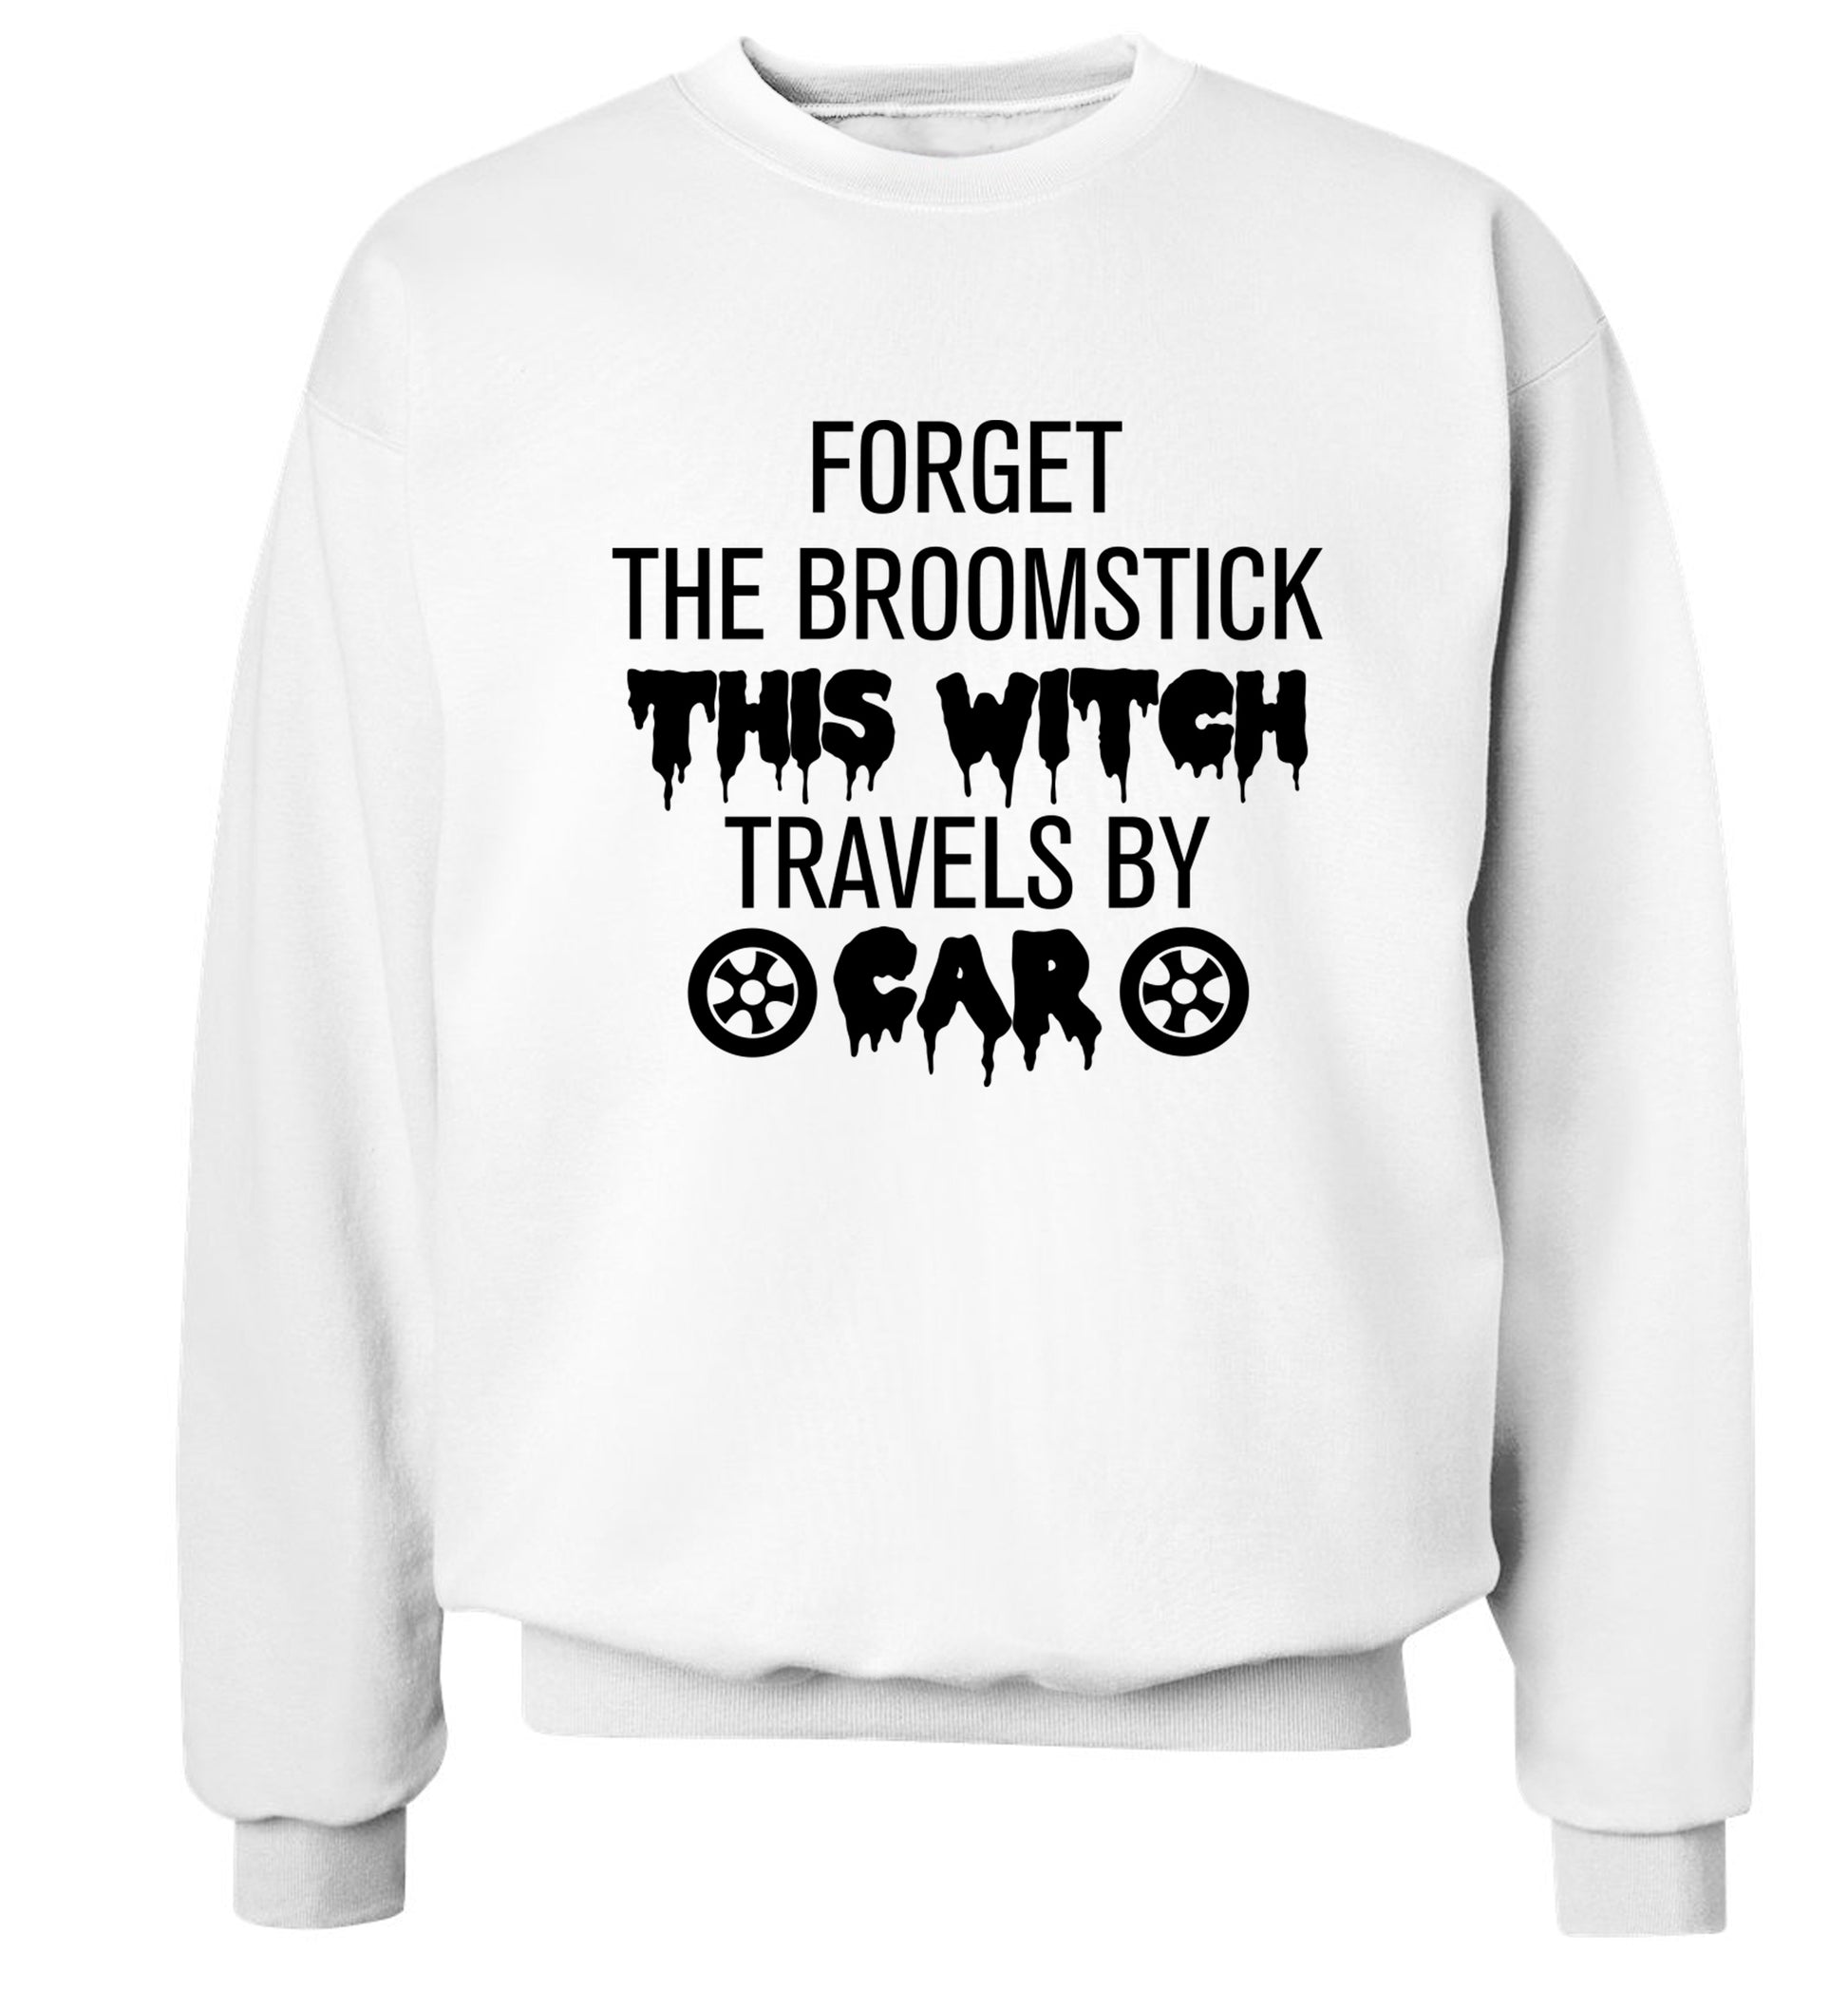 Forget the broomstick this witch travels by car Adult's unisexwhite Sweater 2XL